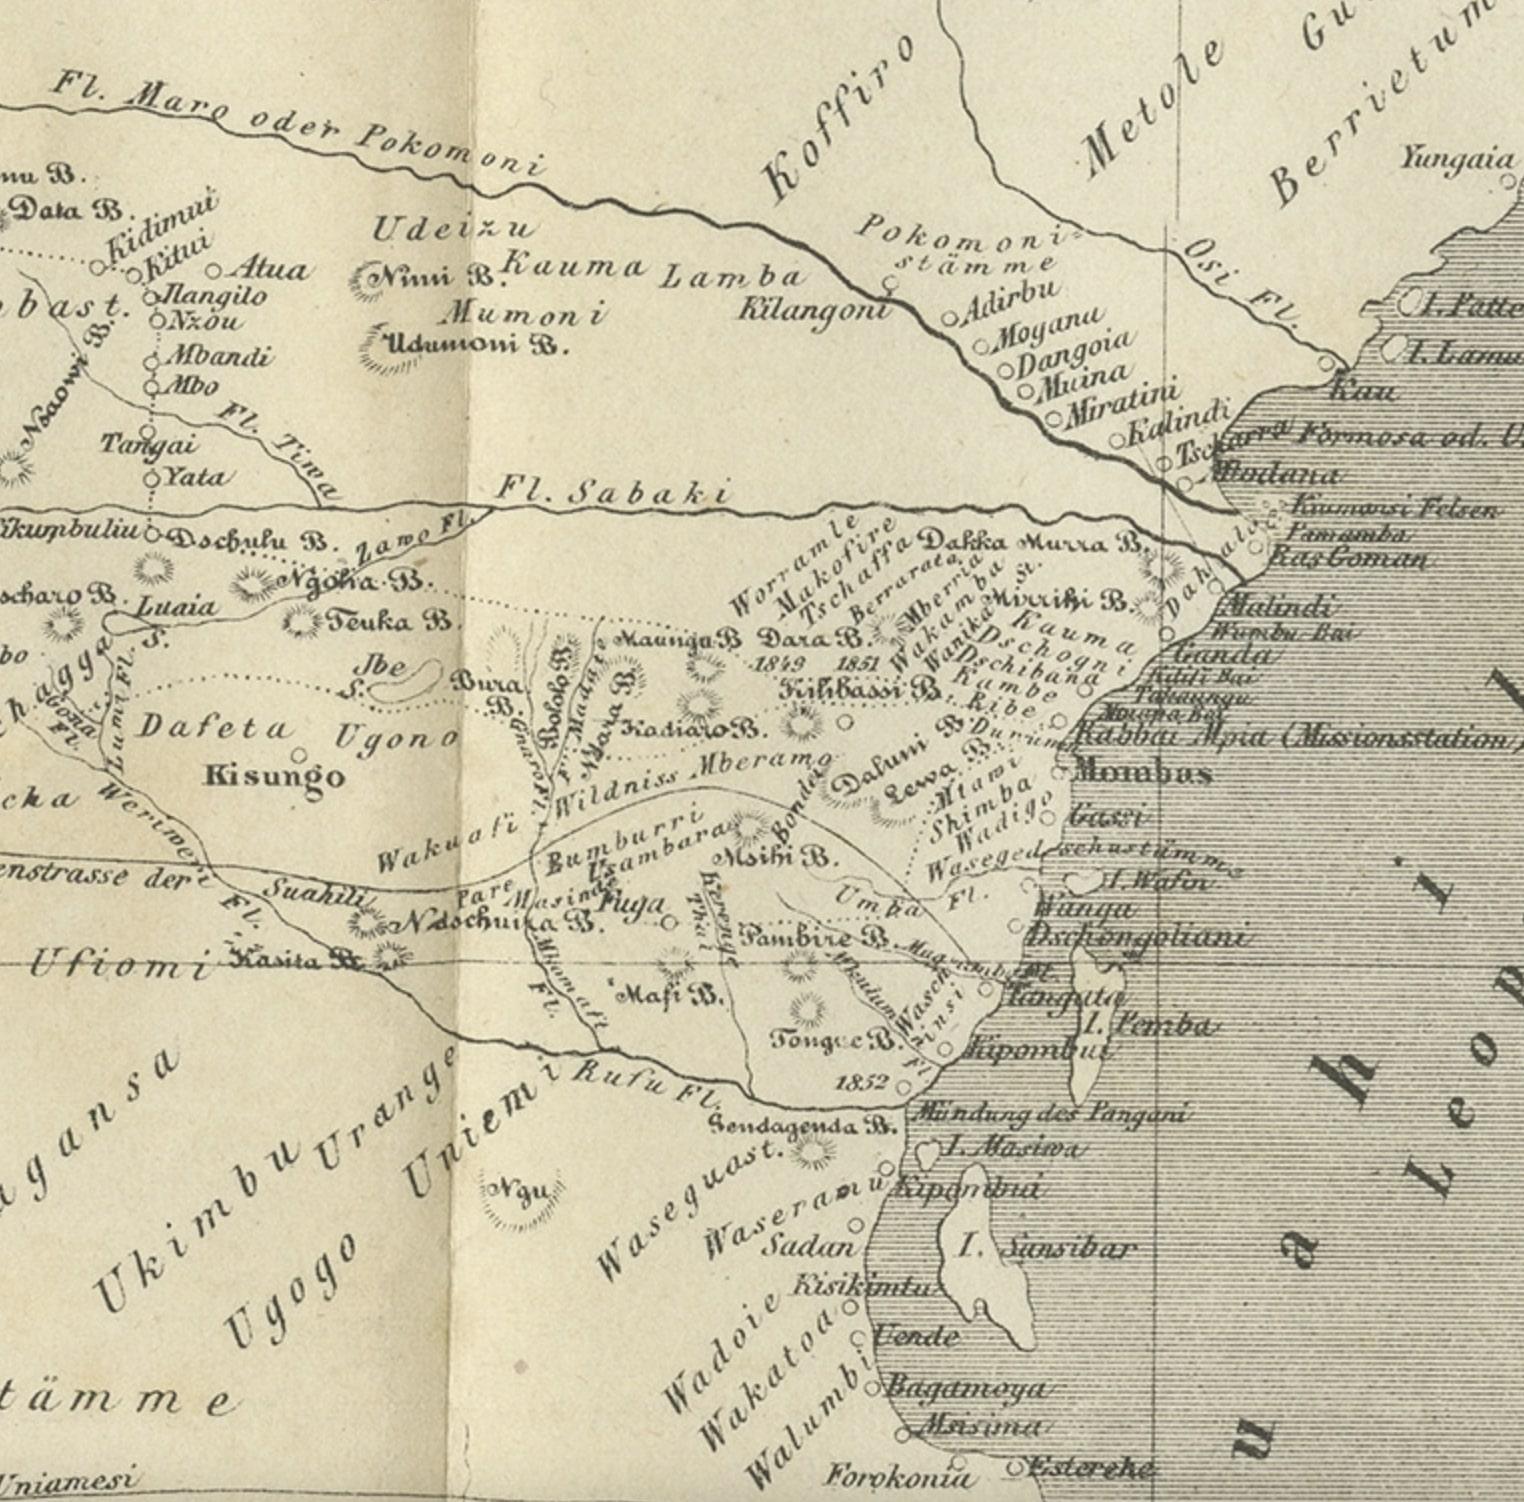 Original antique map of Eastern Africa. This map originates from 'Reisen in Ost-Afrika, ausgeführt in dem Jahren 1837-55' by J.L. Krapf. Published 1858. 

Artists and Engravers: Johann Ludwig Krapf (11 January 1810 – 26 November 1881) was a German